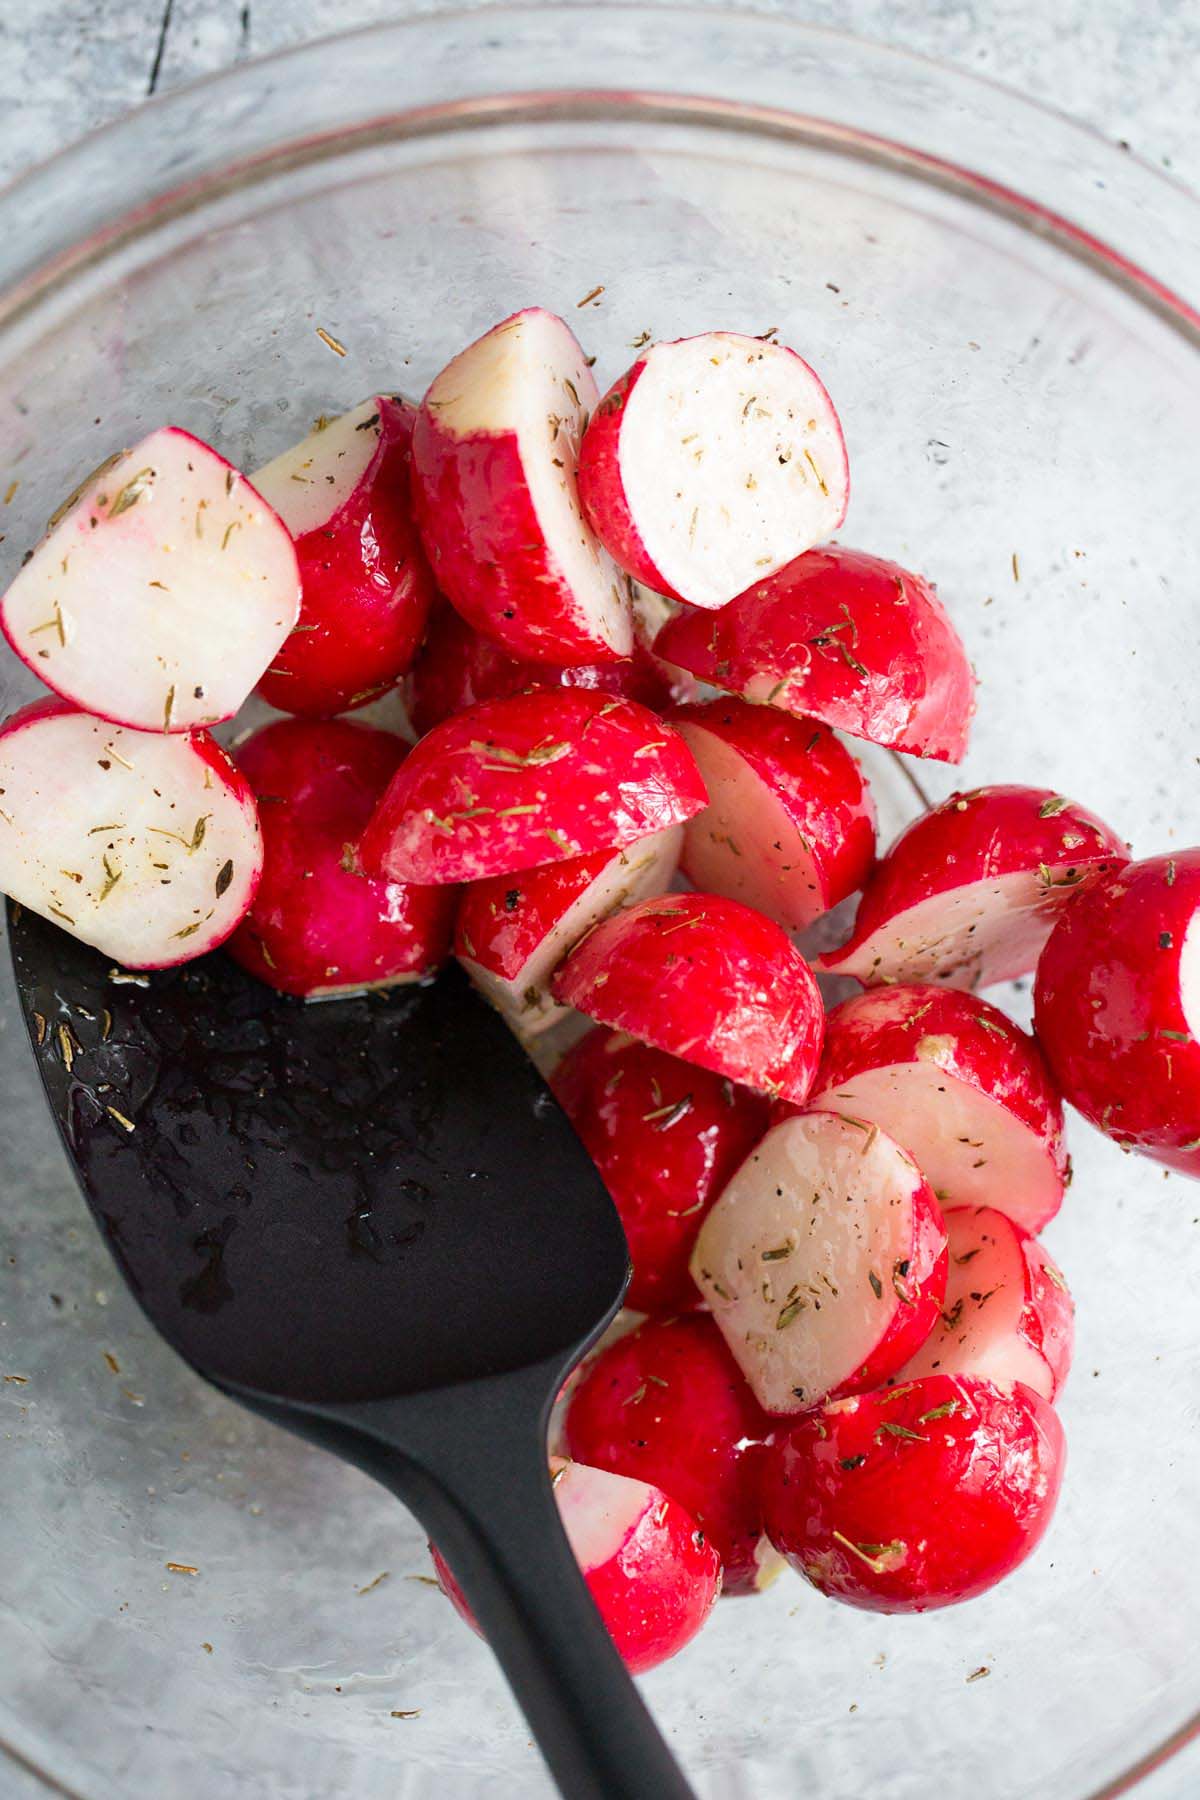 Radishes tossed with oil and herbs.